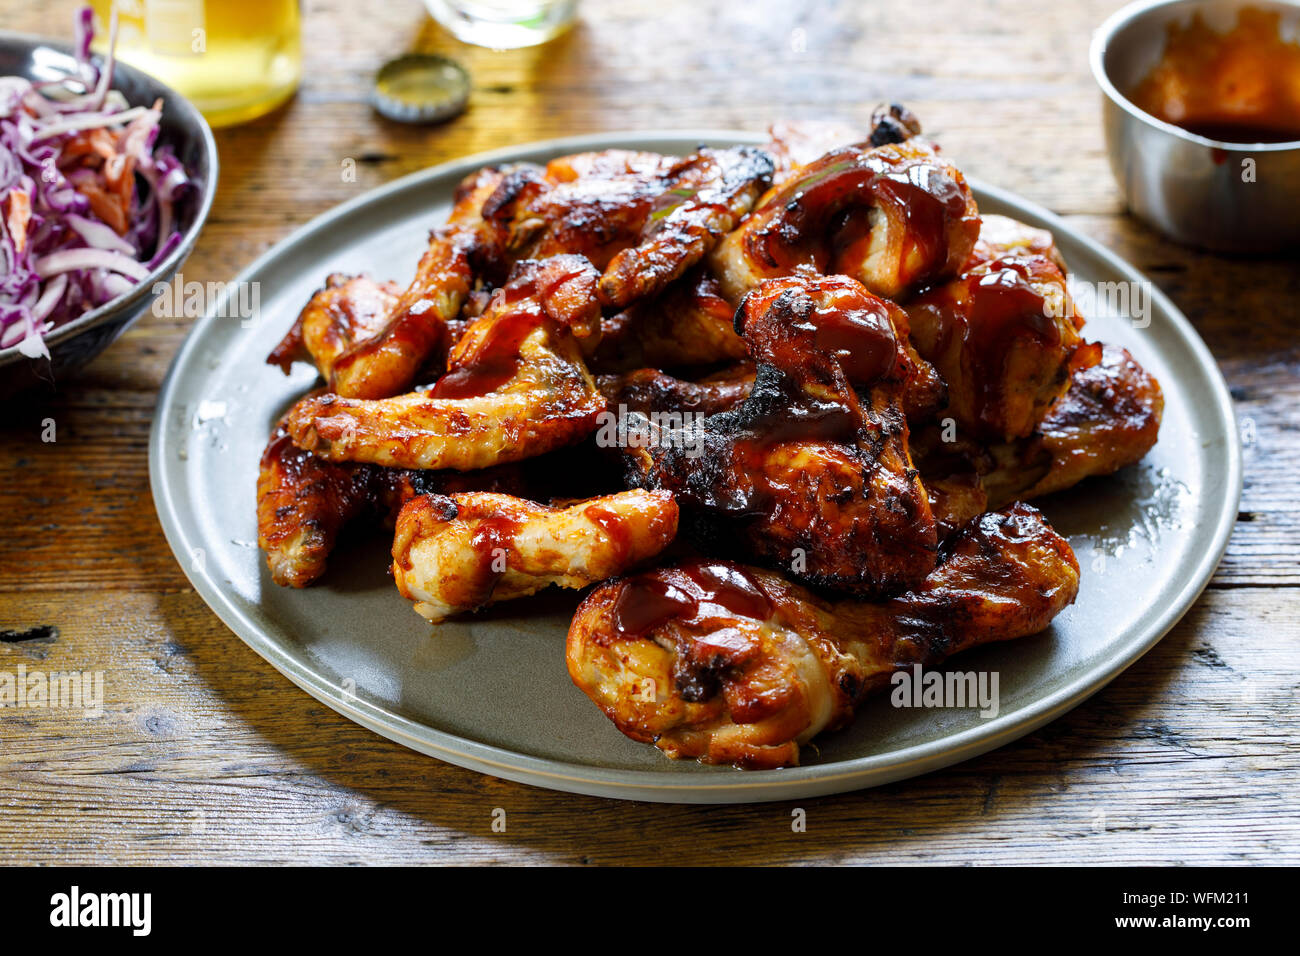 Barbecue chicken wings and drumsticks with sauce Stock Photo